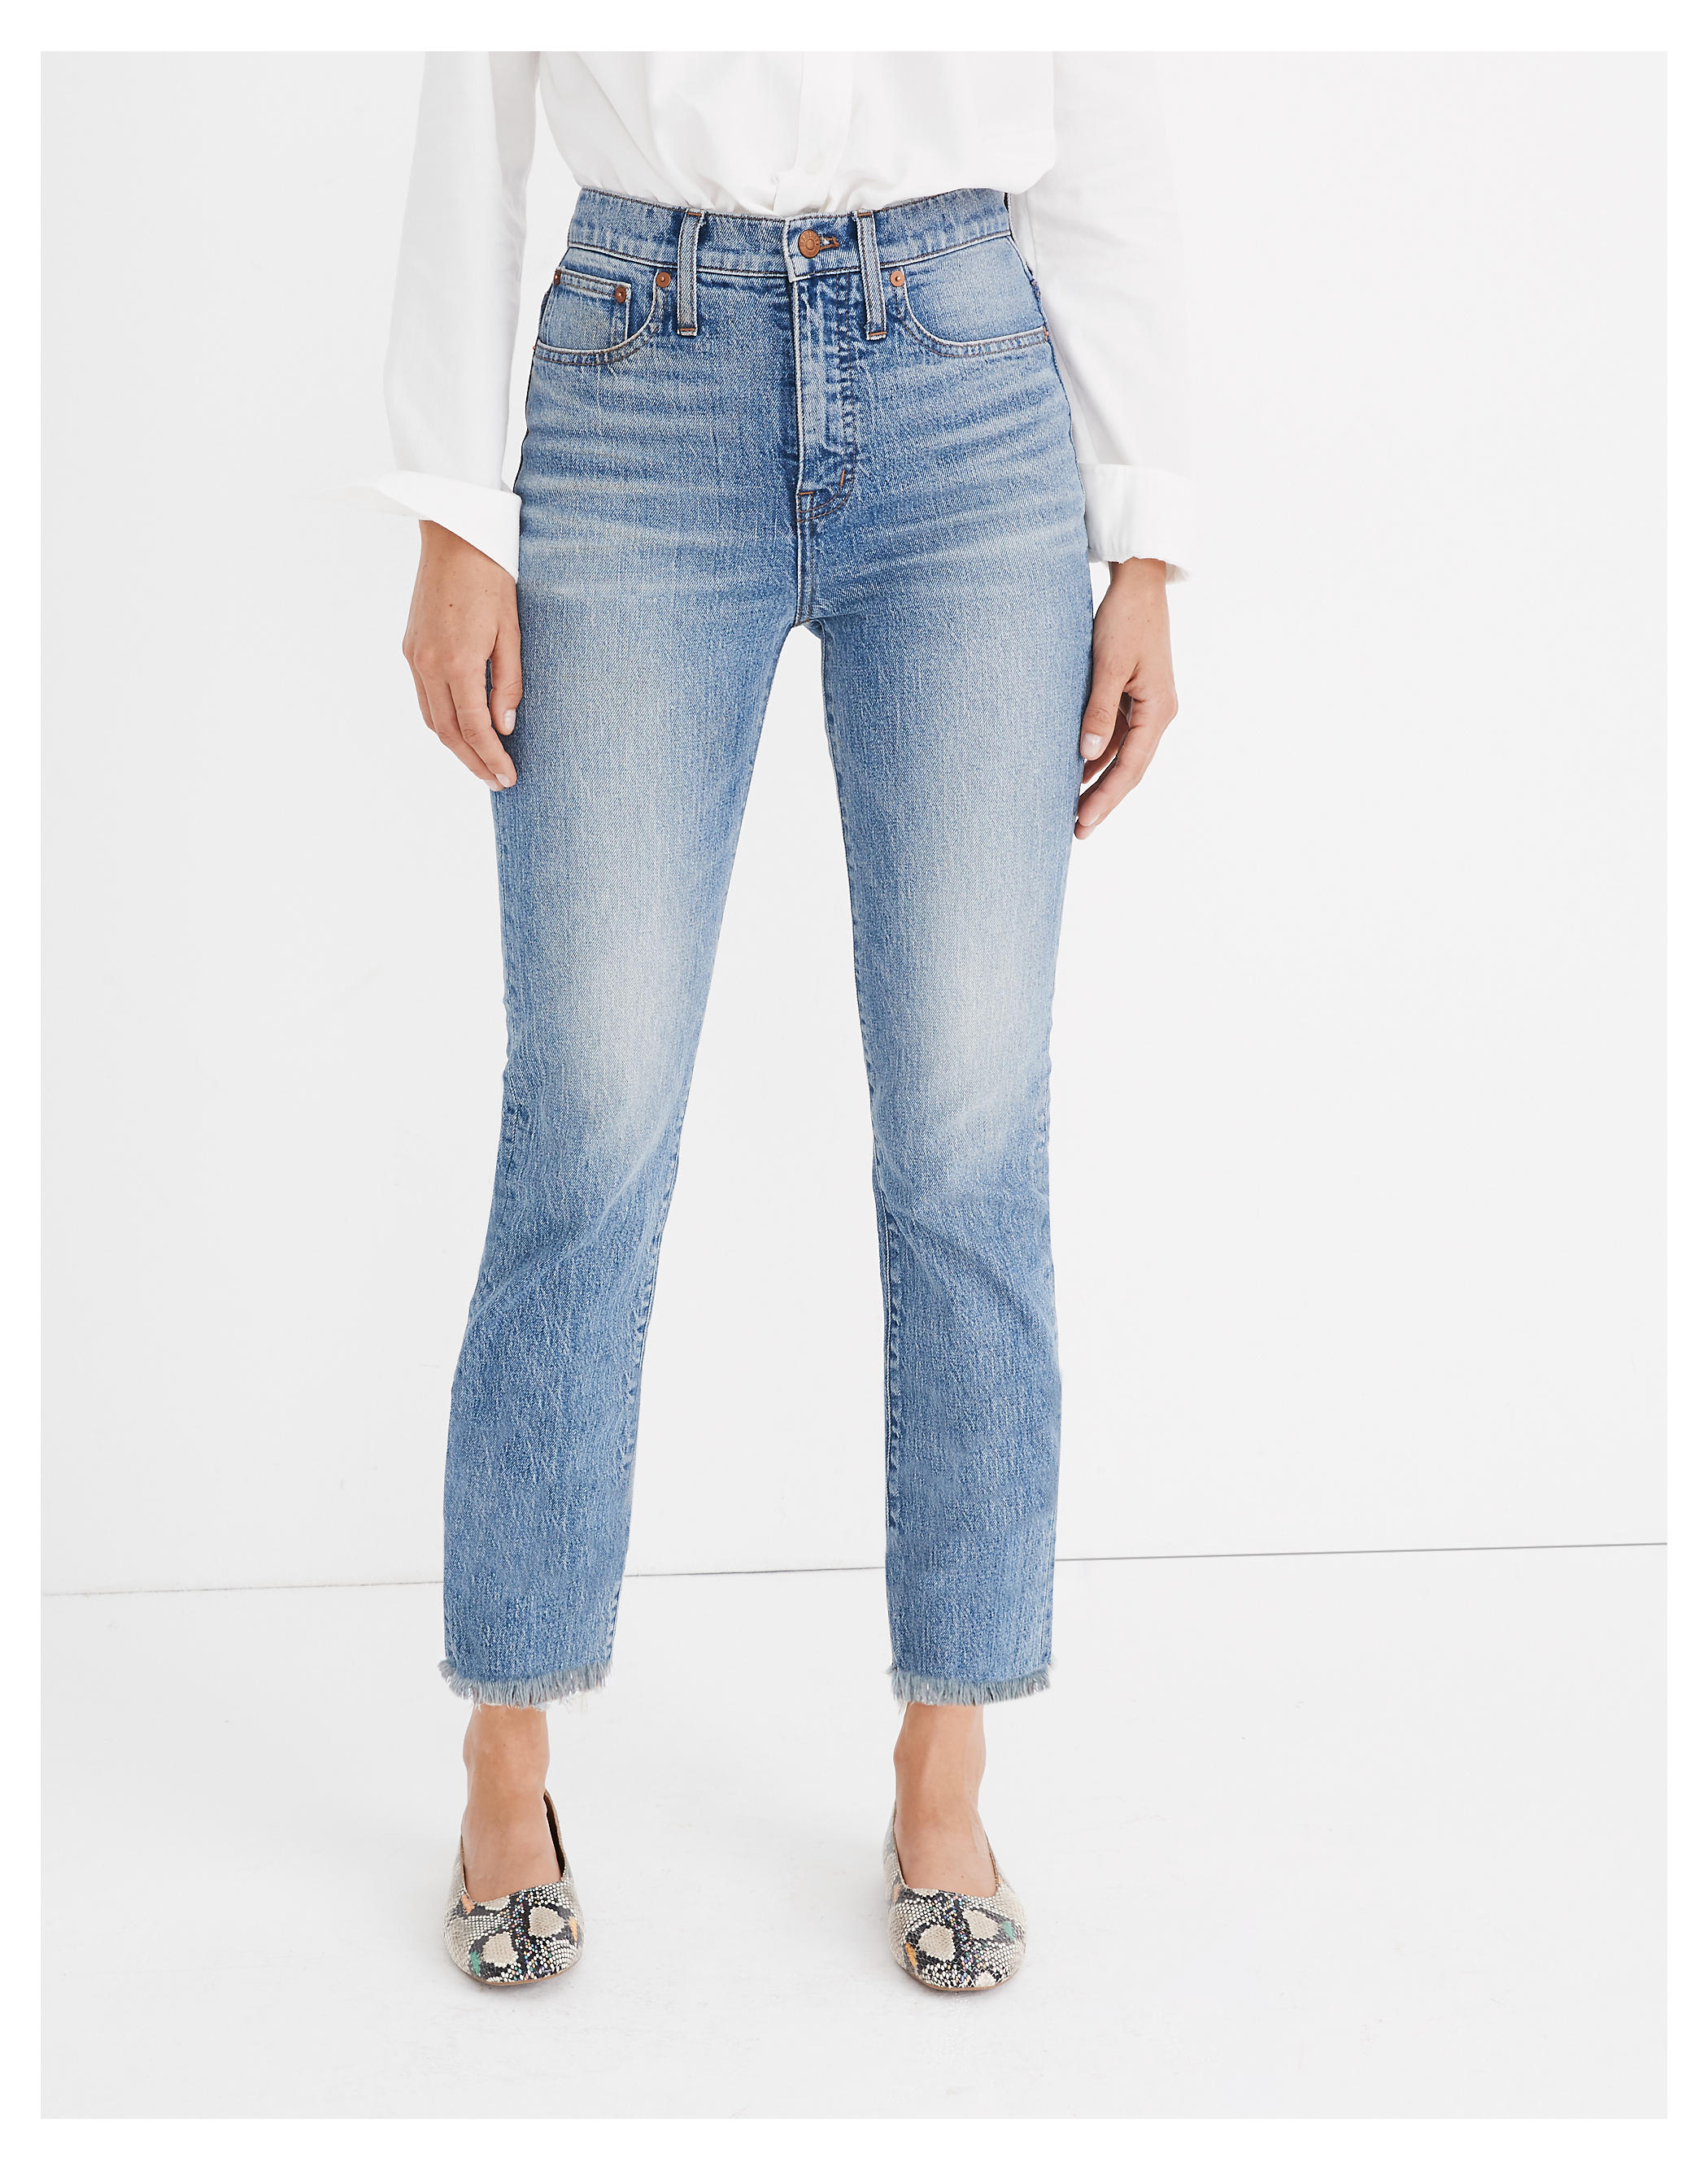 MADEWELL The Perfect Vintage Jean in Ainsworth Wash